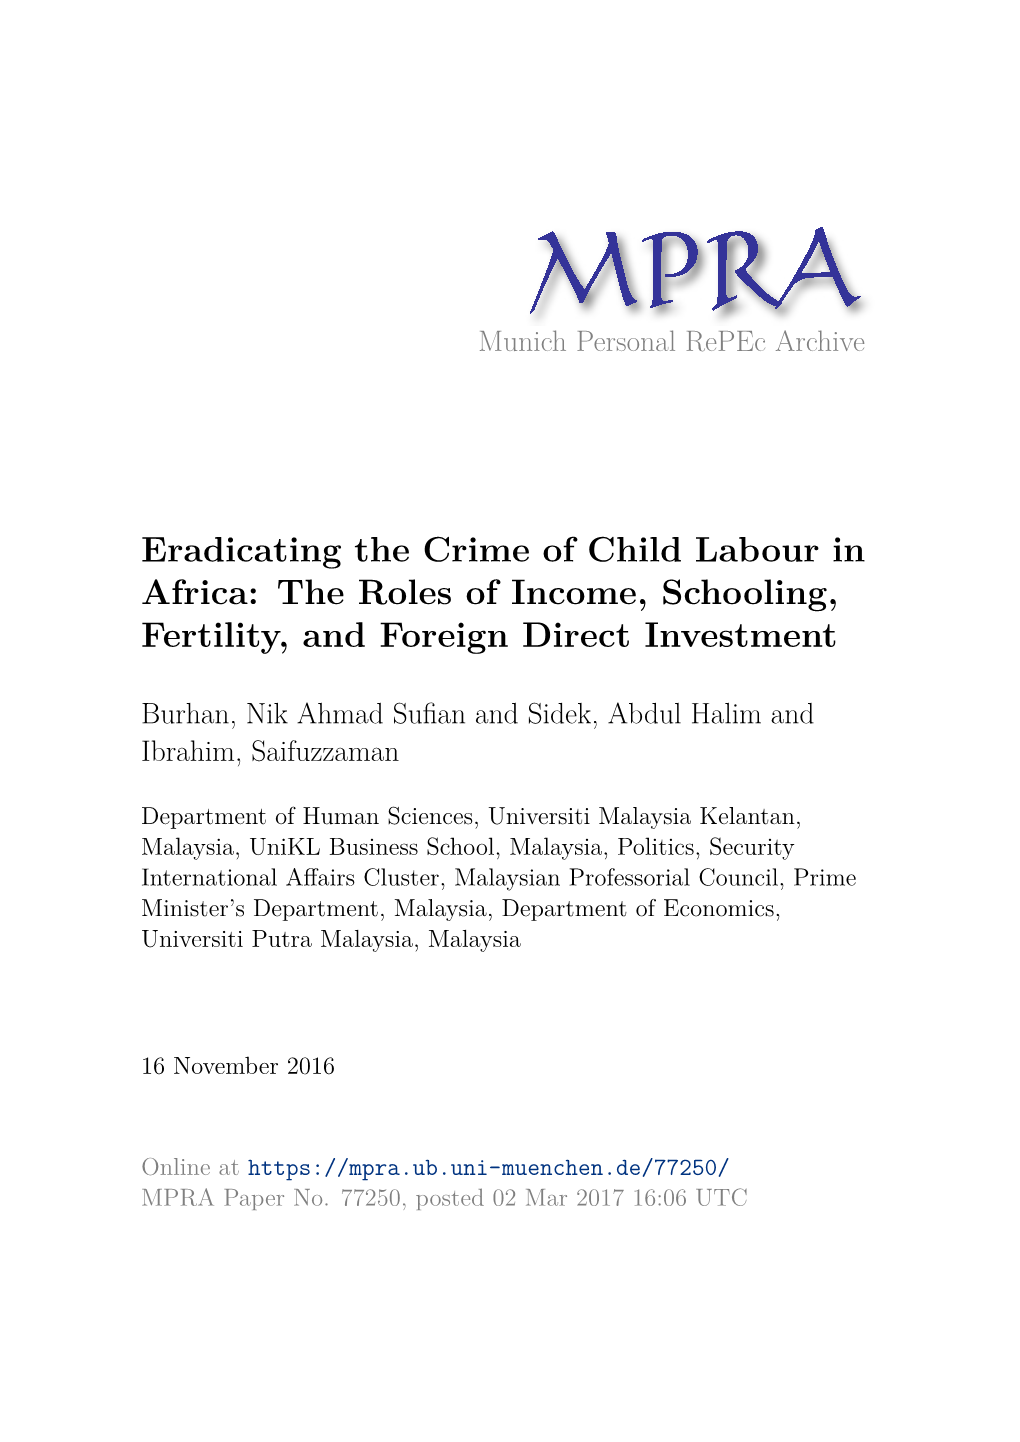 Eradicating the Crime of Child Labour in Africa: the Roles of Income, Schooling, Fertility, and Foreign Direct Investment